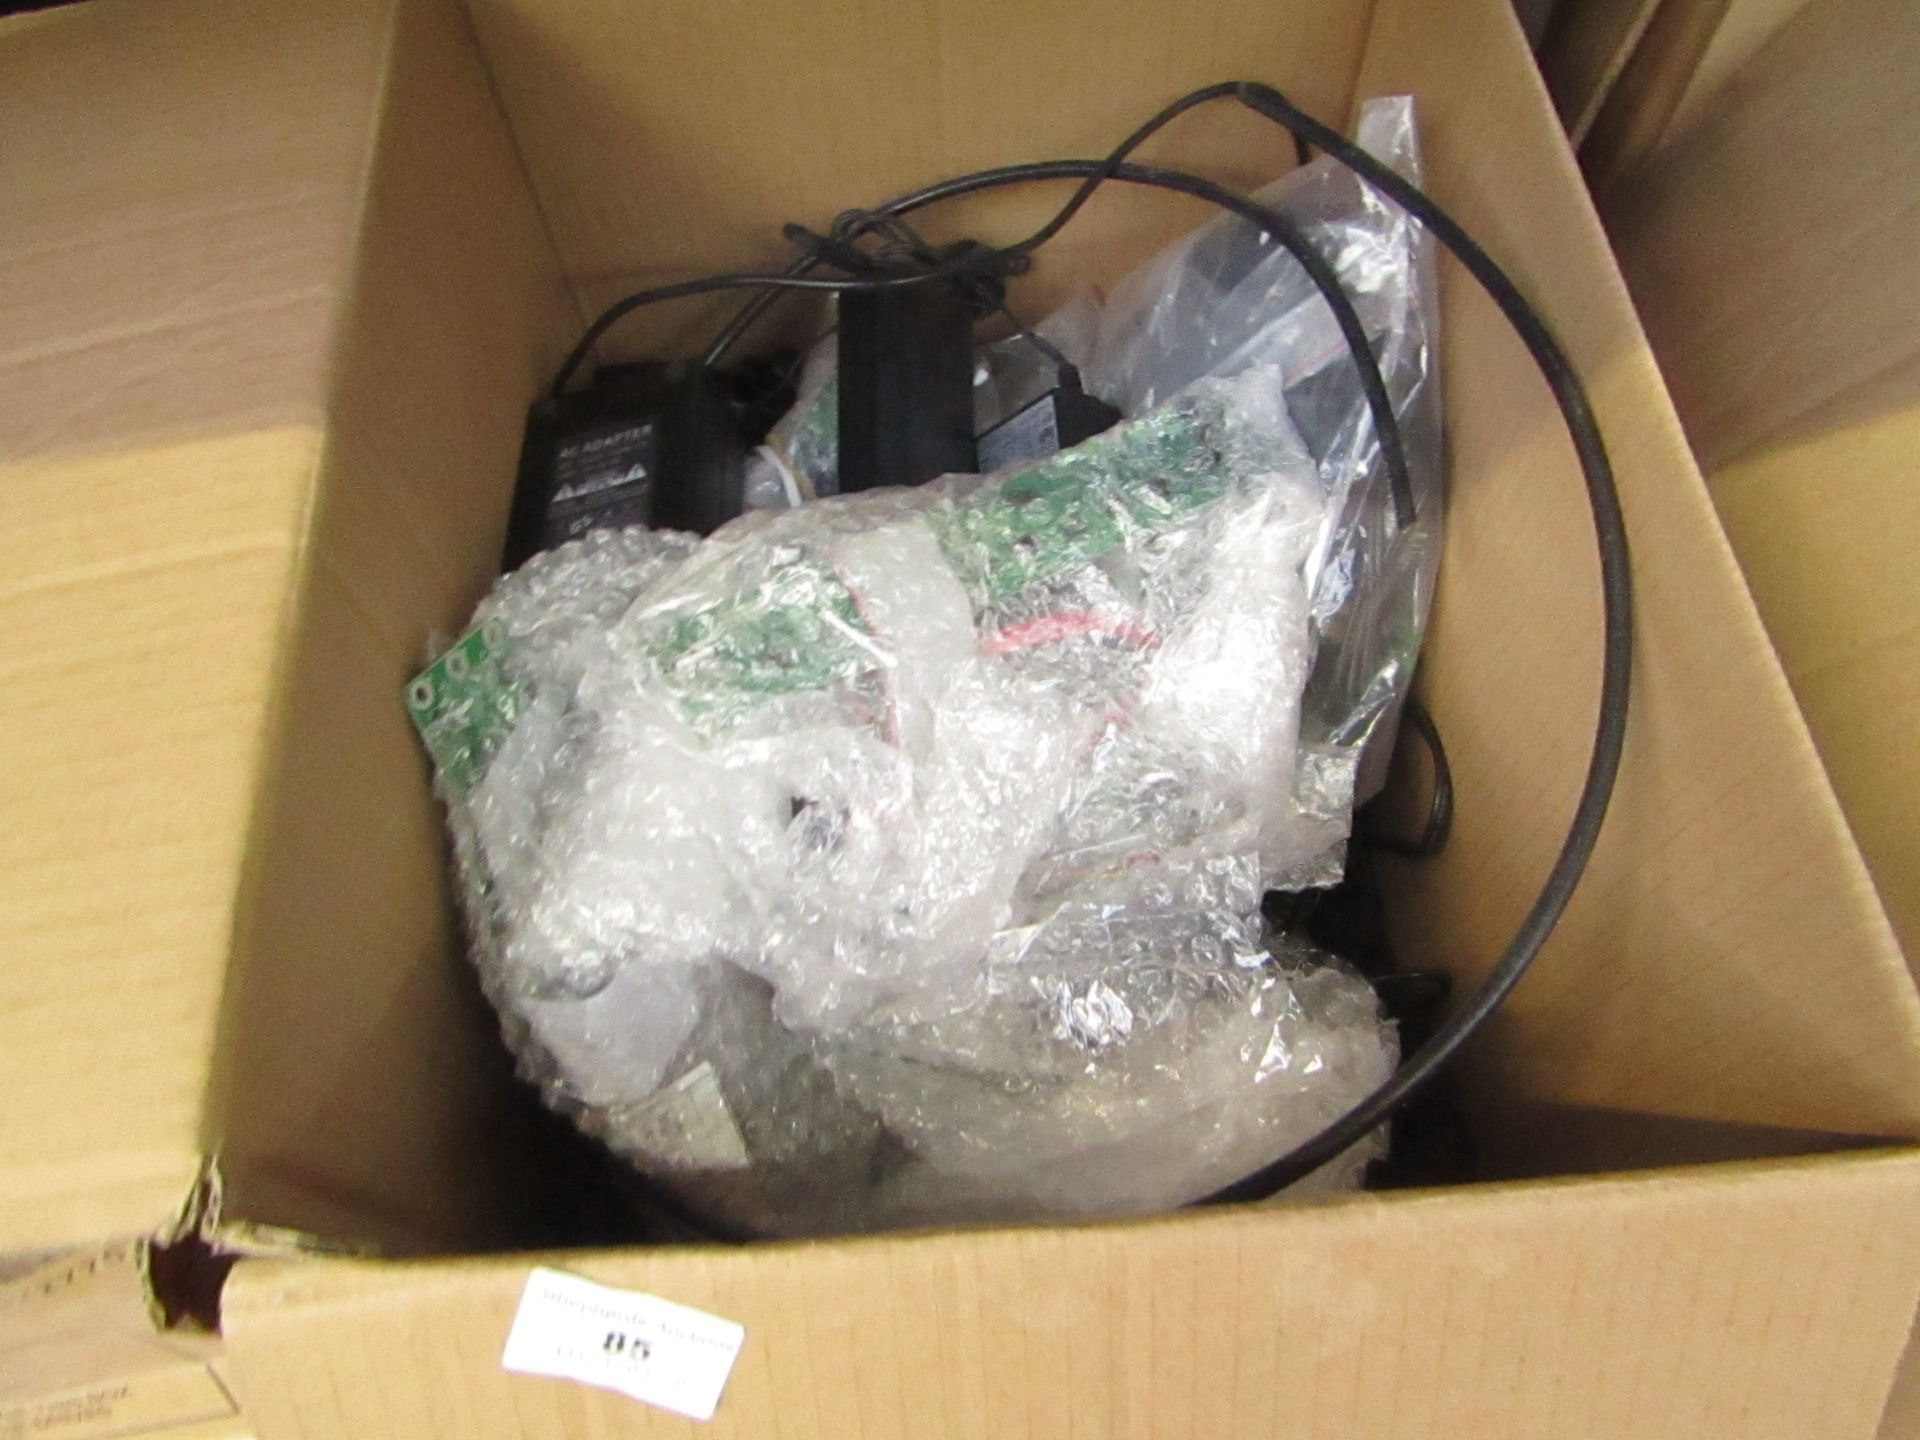 Box of random electrical goods - AC adapters random circuit boards note this lot is completely